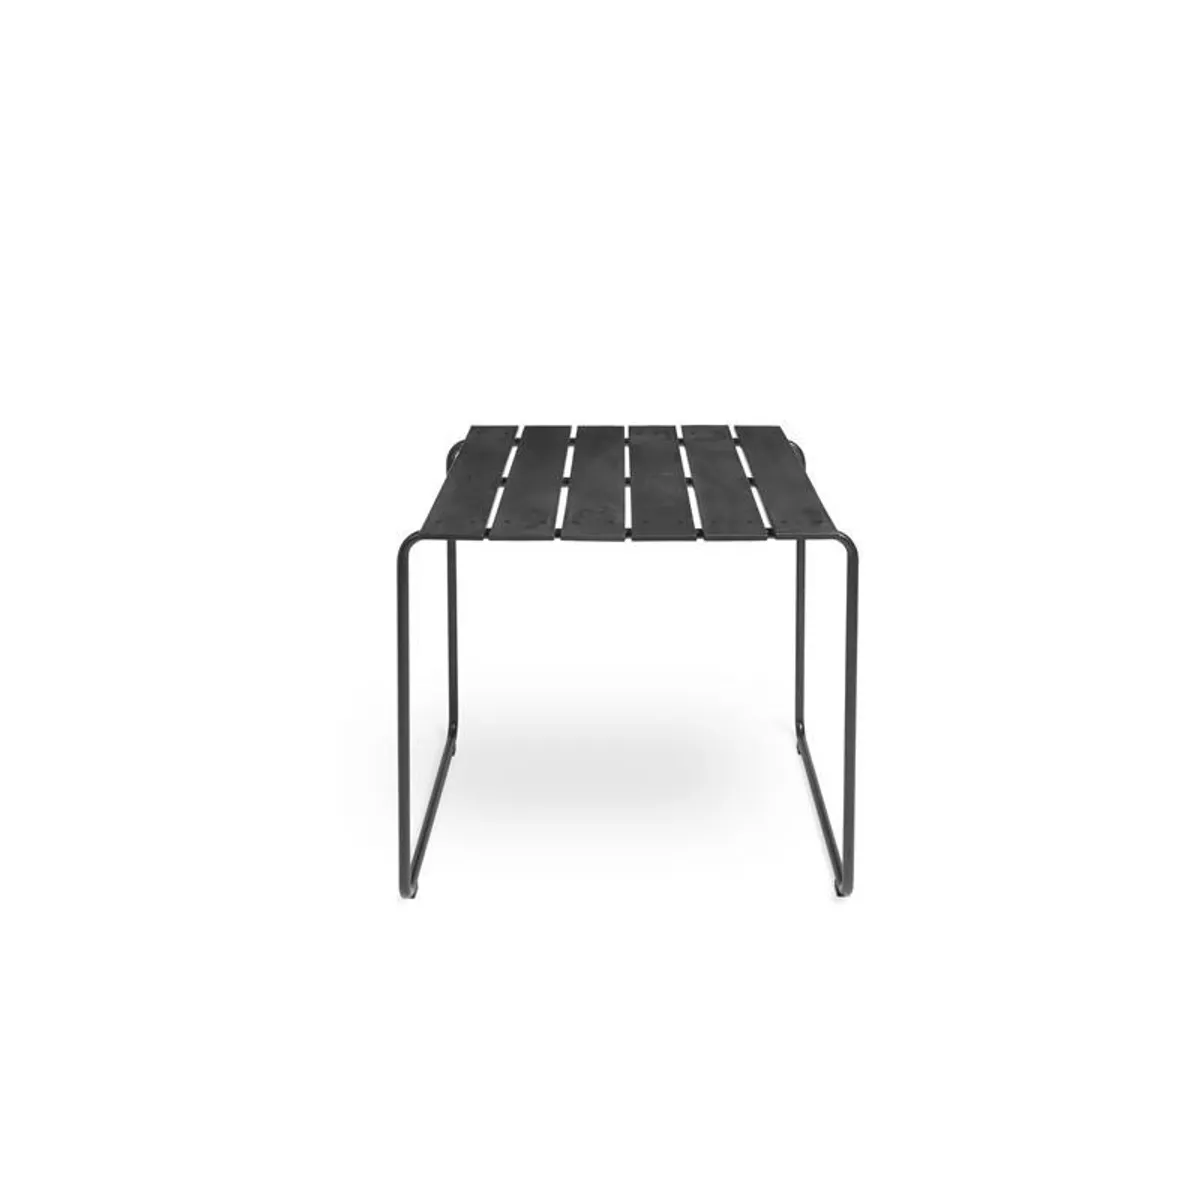 Ocean Table Recycled Plastic Waste With Metal Sled Legs Outdoor Dining Table In Black 003 Inside Out Contracts